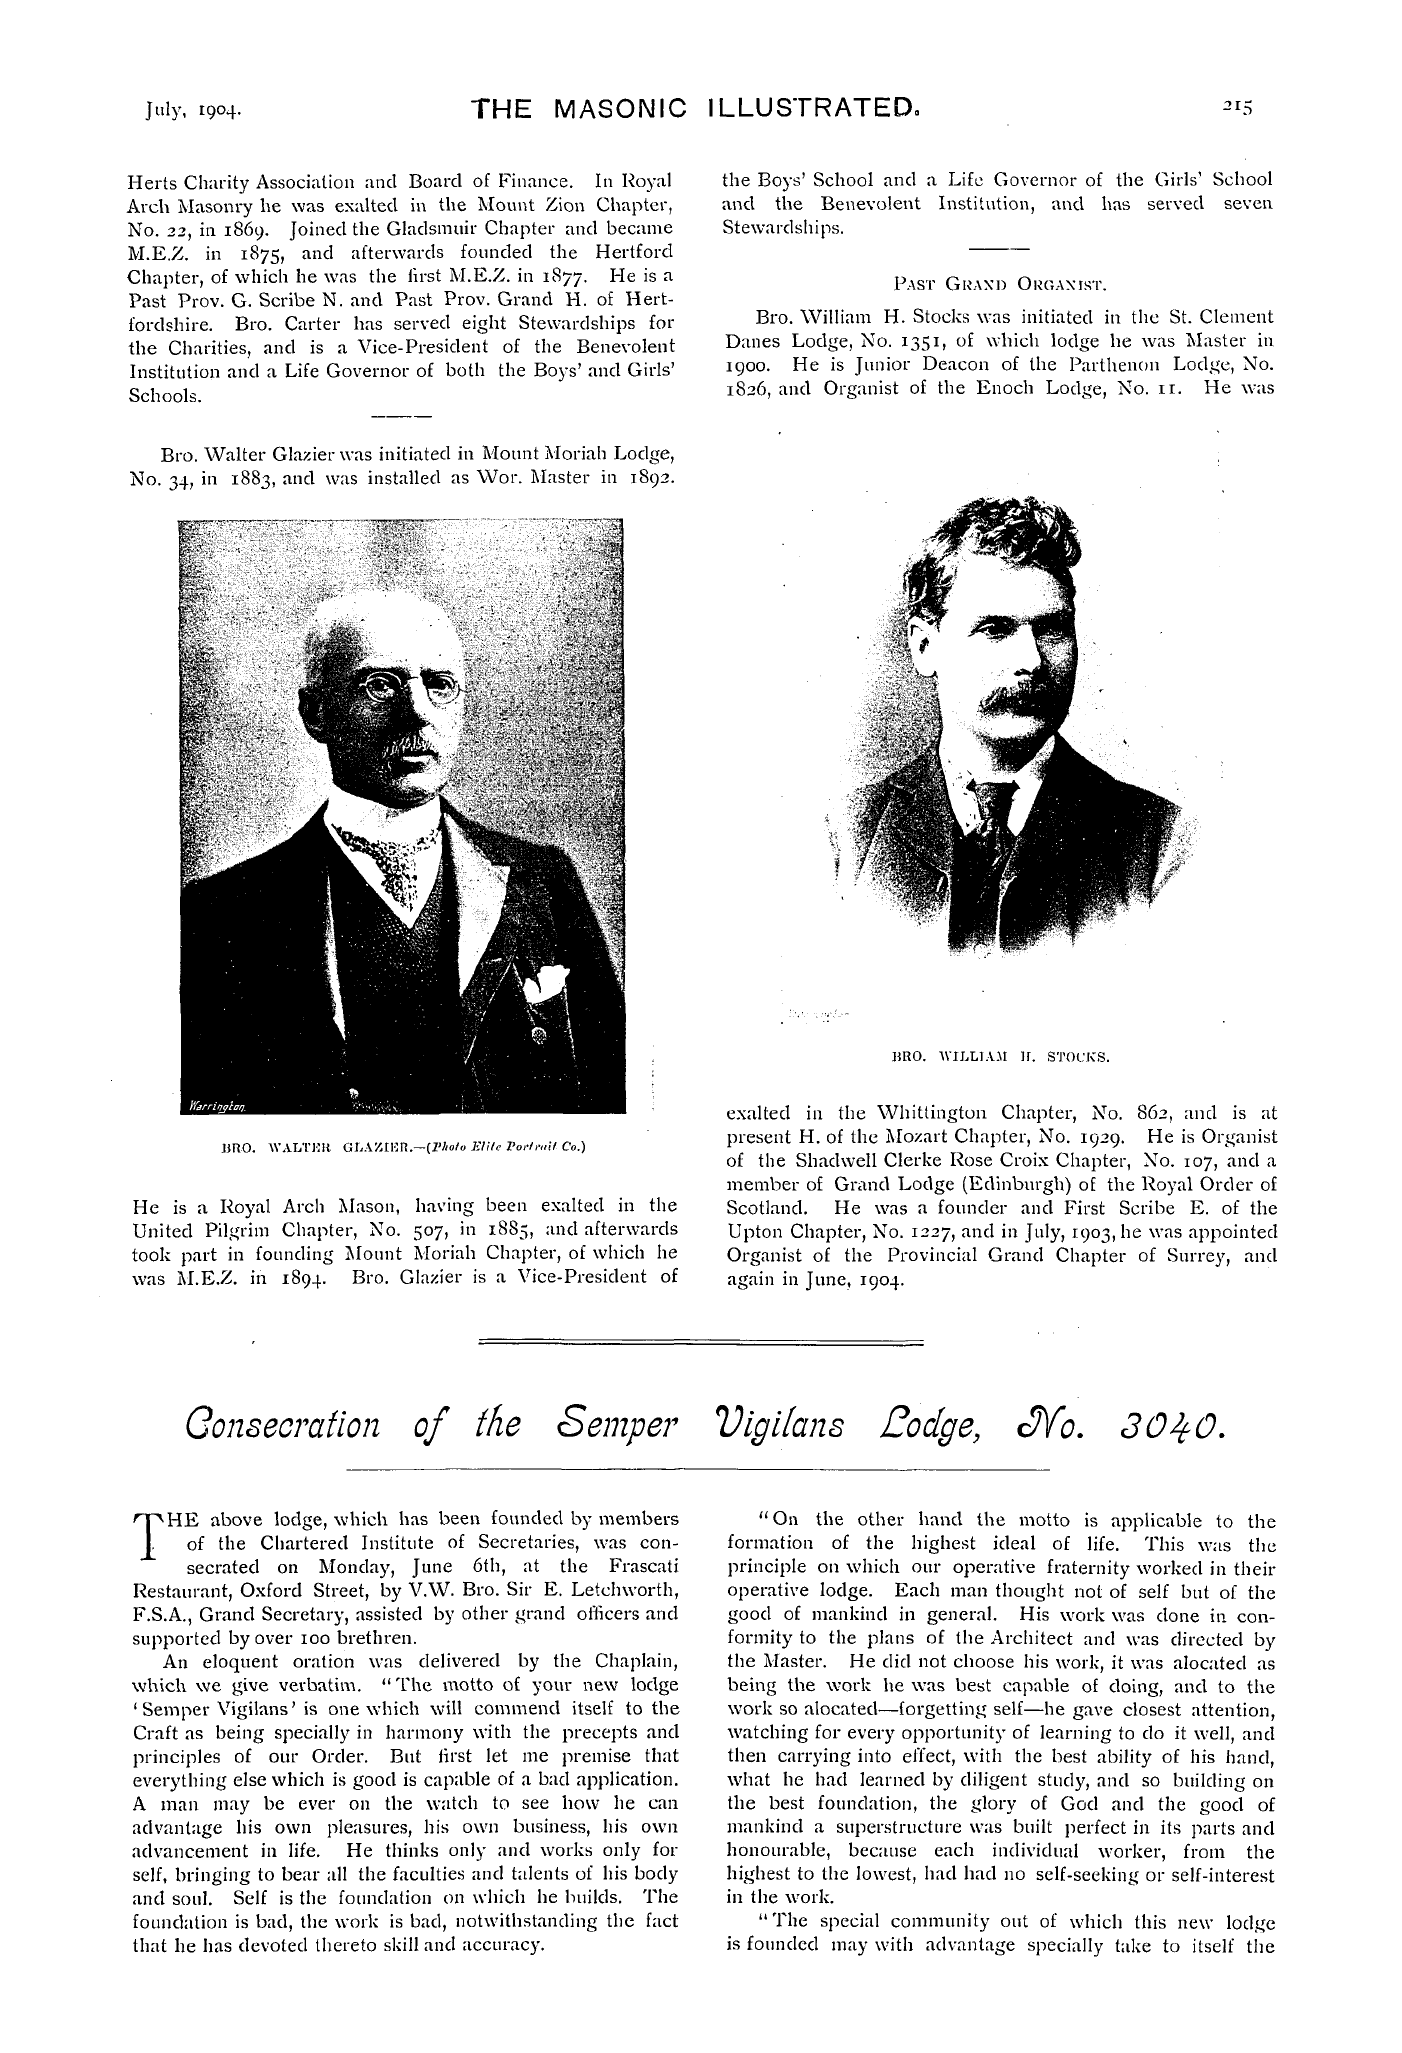 The Masonic Illustrated: 1904-07-01 - The New Past Grand Officers.